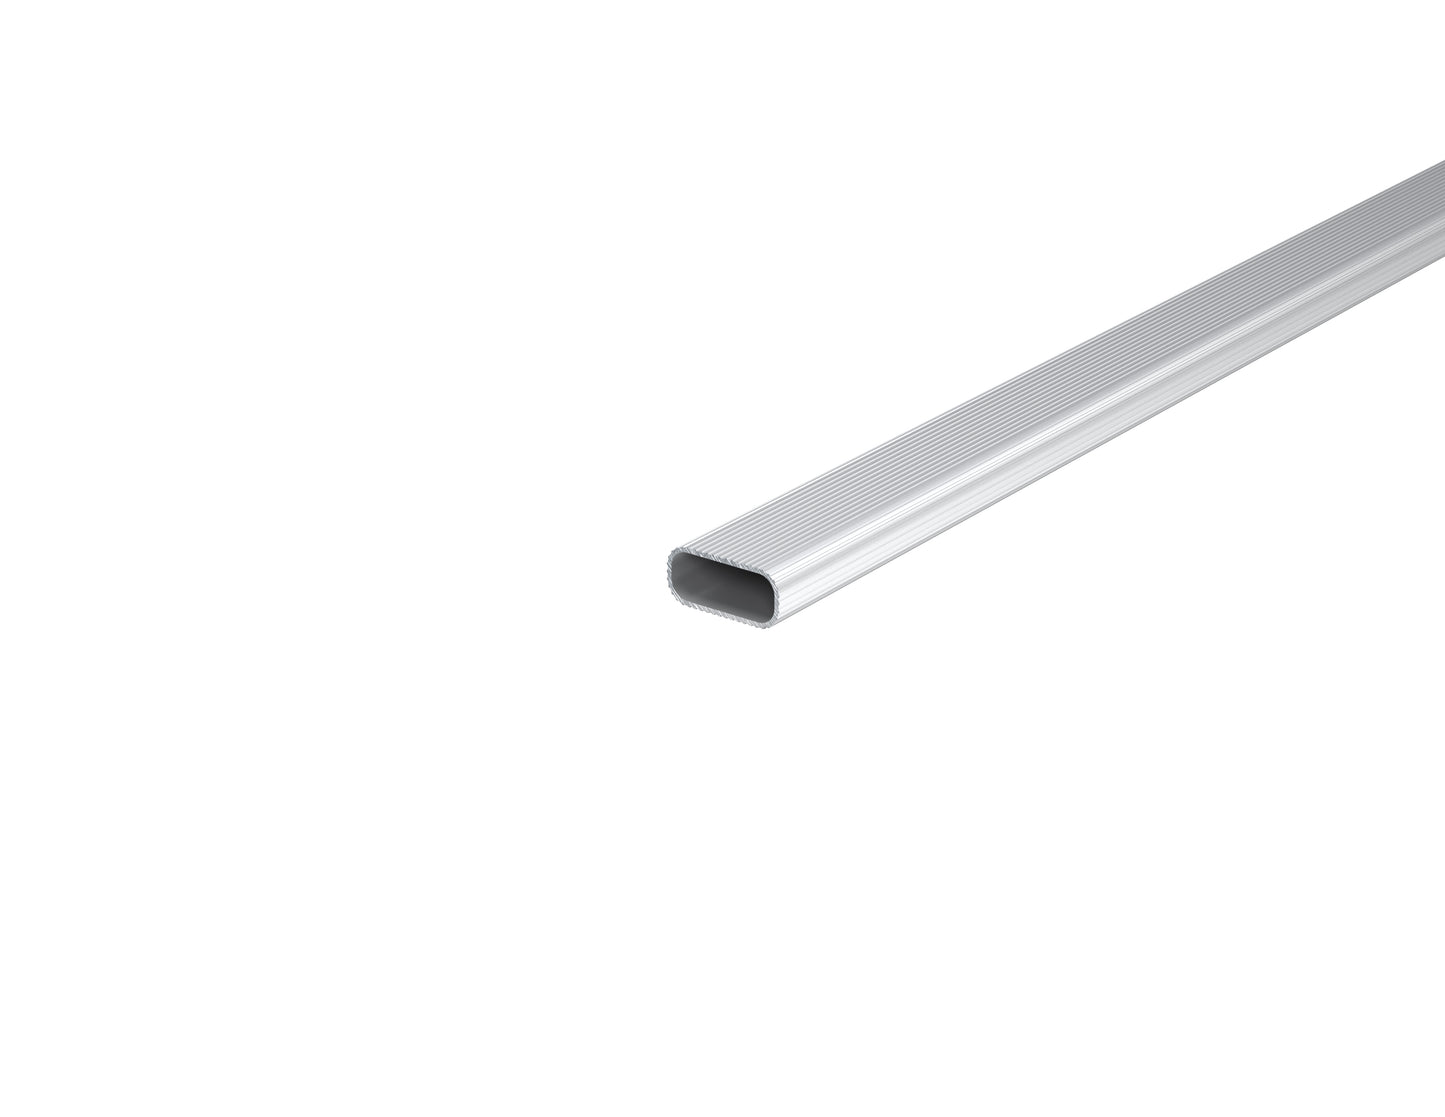 1/2" X 1-1/8" Aluminum oval fluted exterior extrusion lengths cut to size